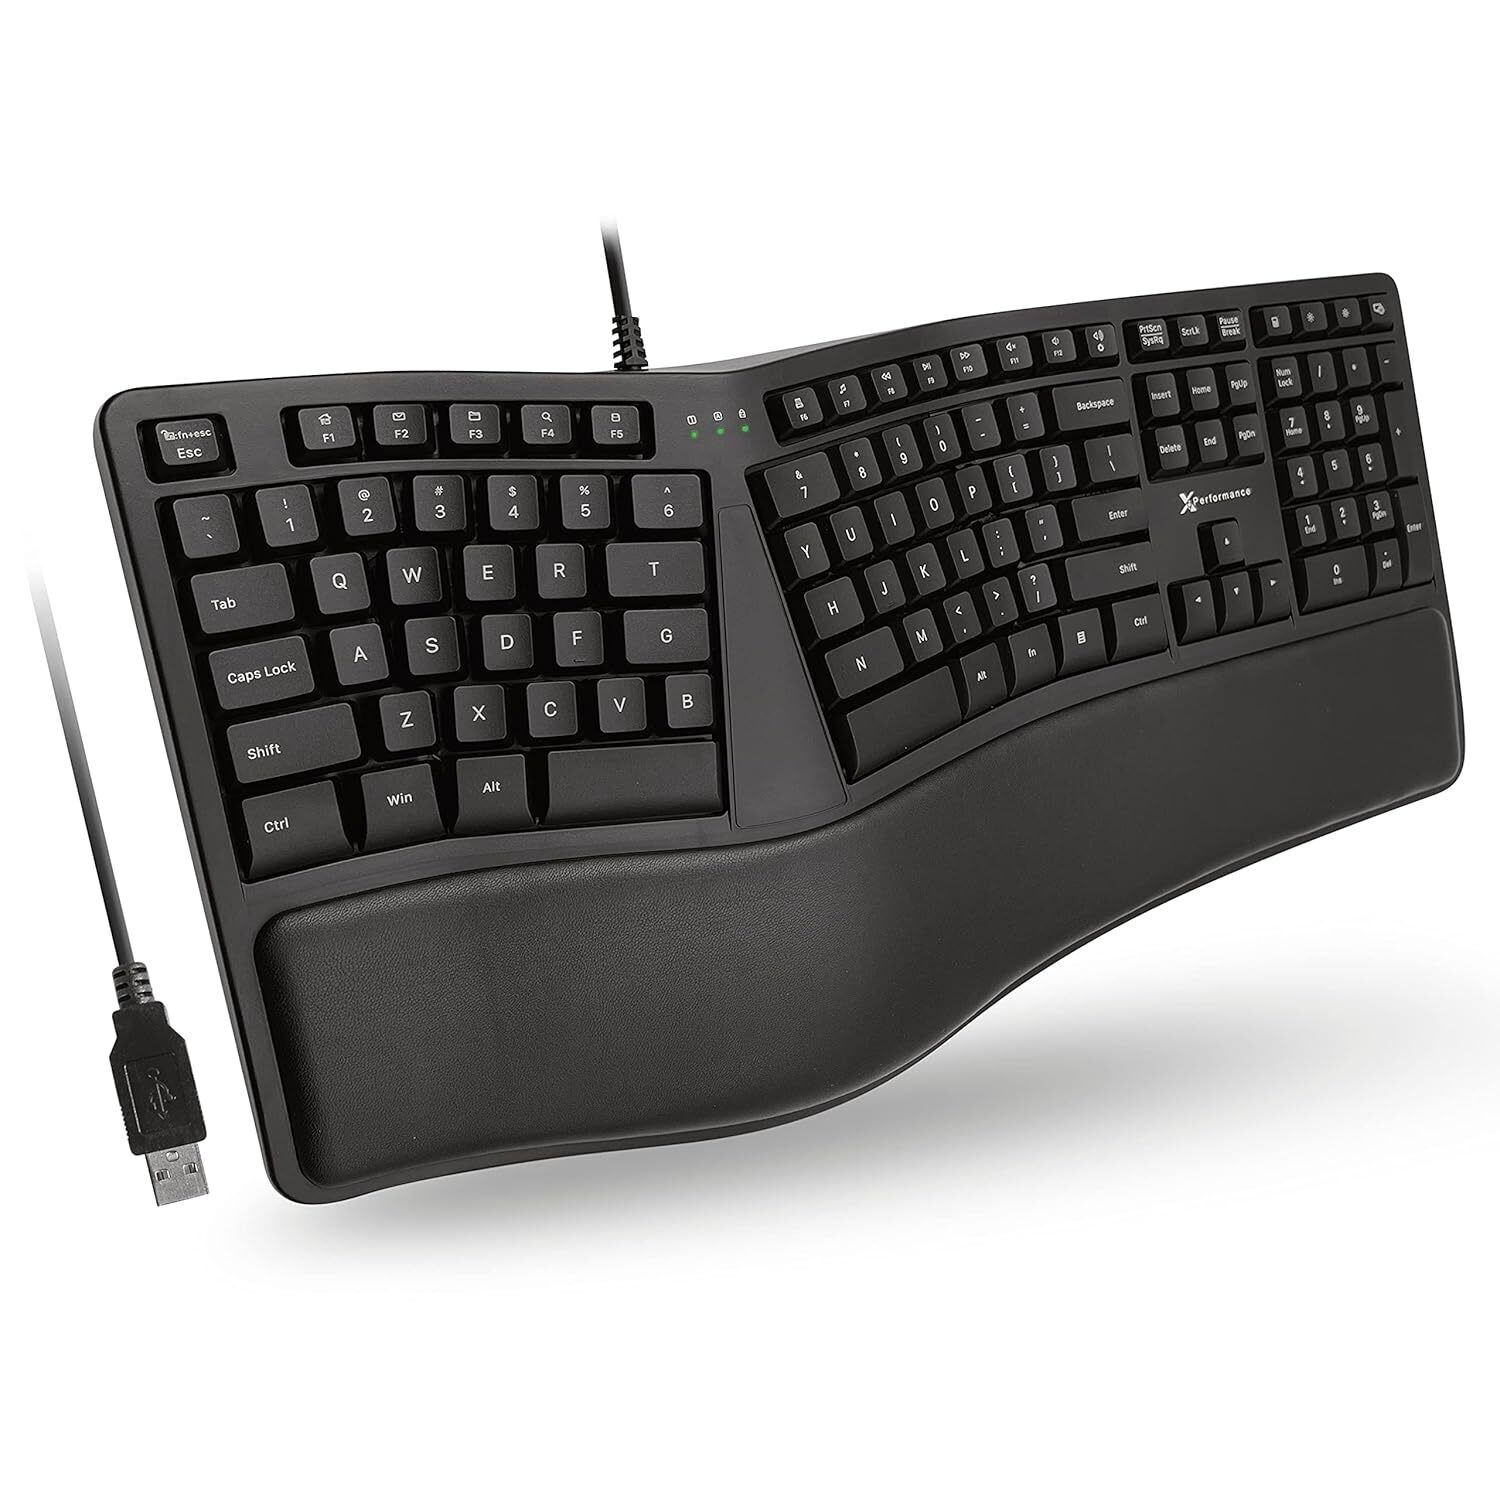 Ergonomic Keyboard Wired With Wrist Rest - Type Comfortably Longer - Usb Wired